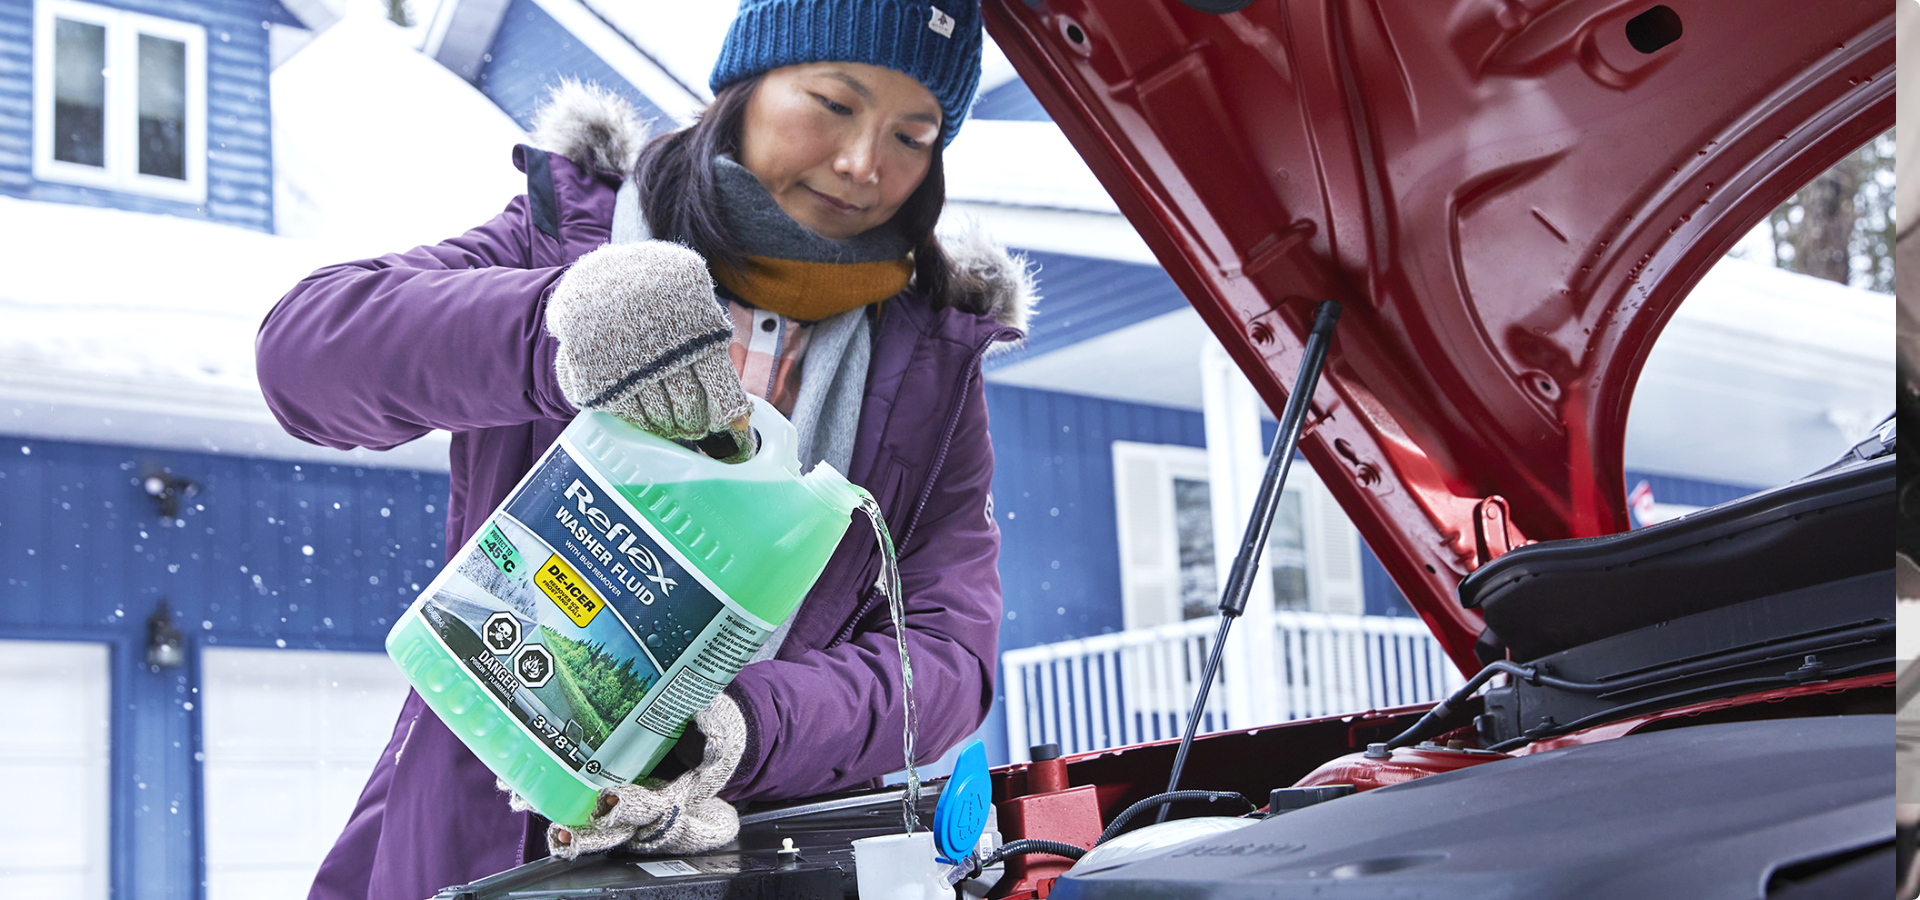 A driver pours Reflex Washer Fluid into a car’s fluid reservoir in a winter setting.